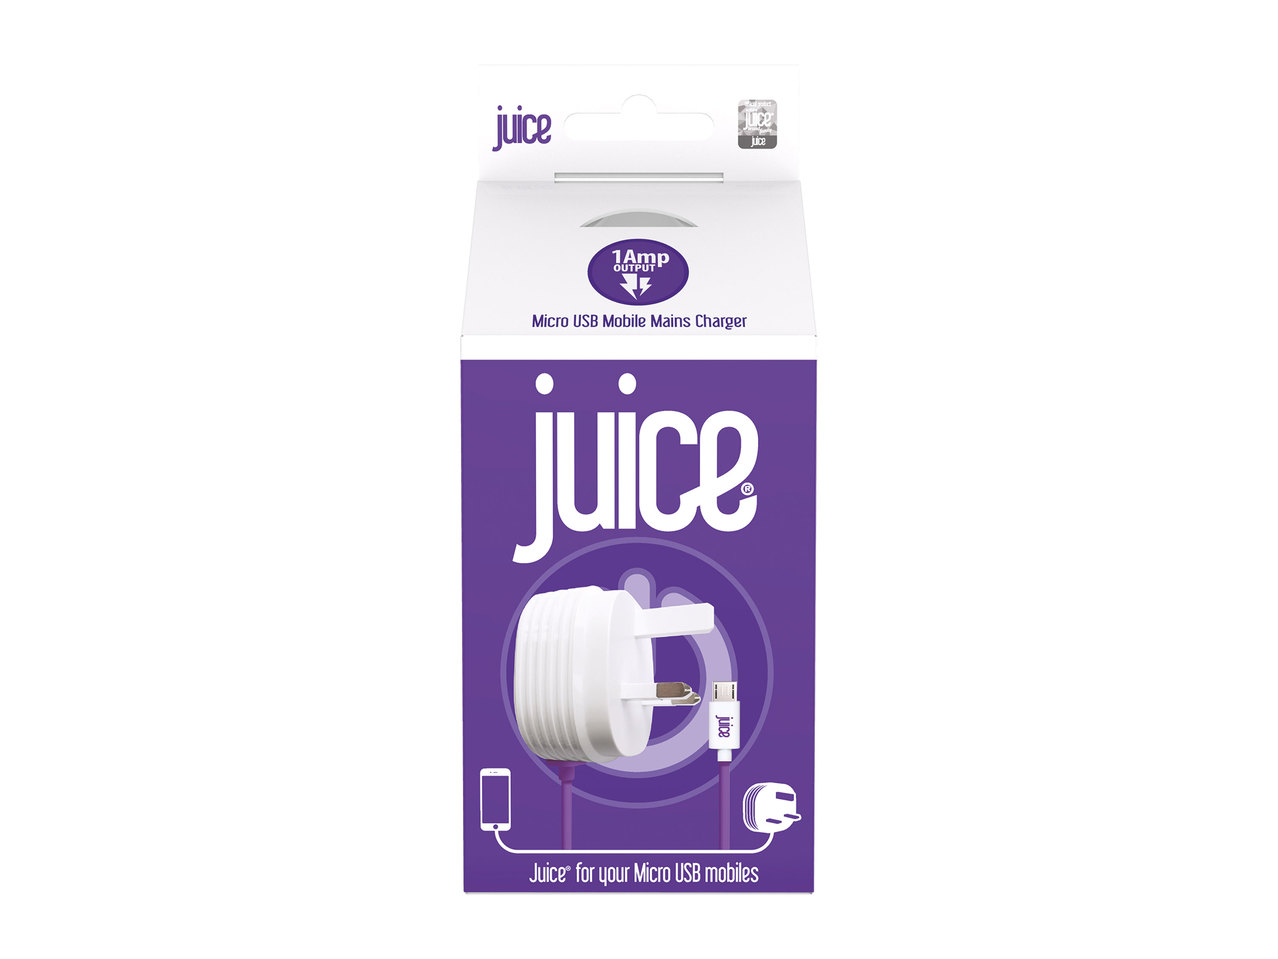 Juice Charger or Cable1